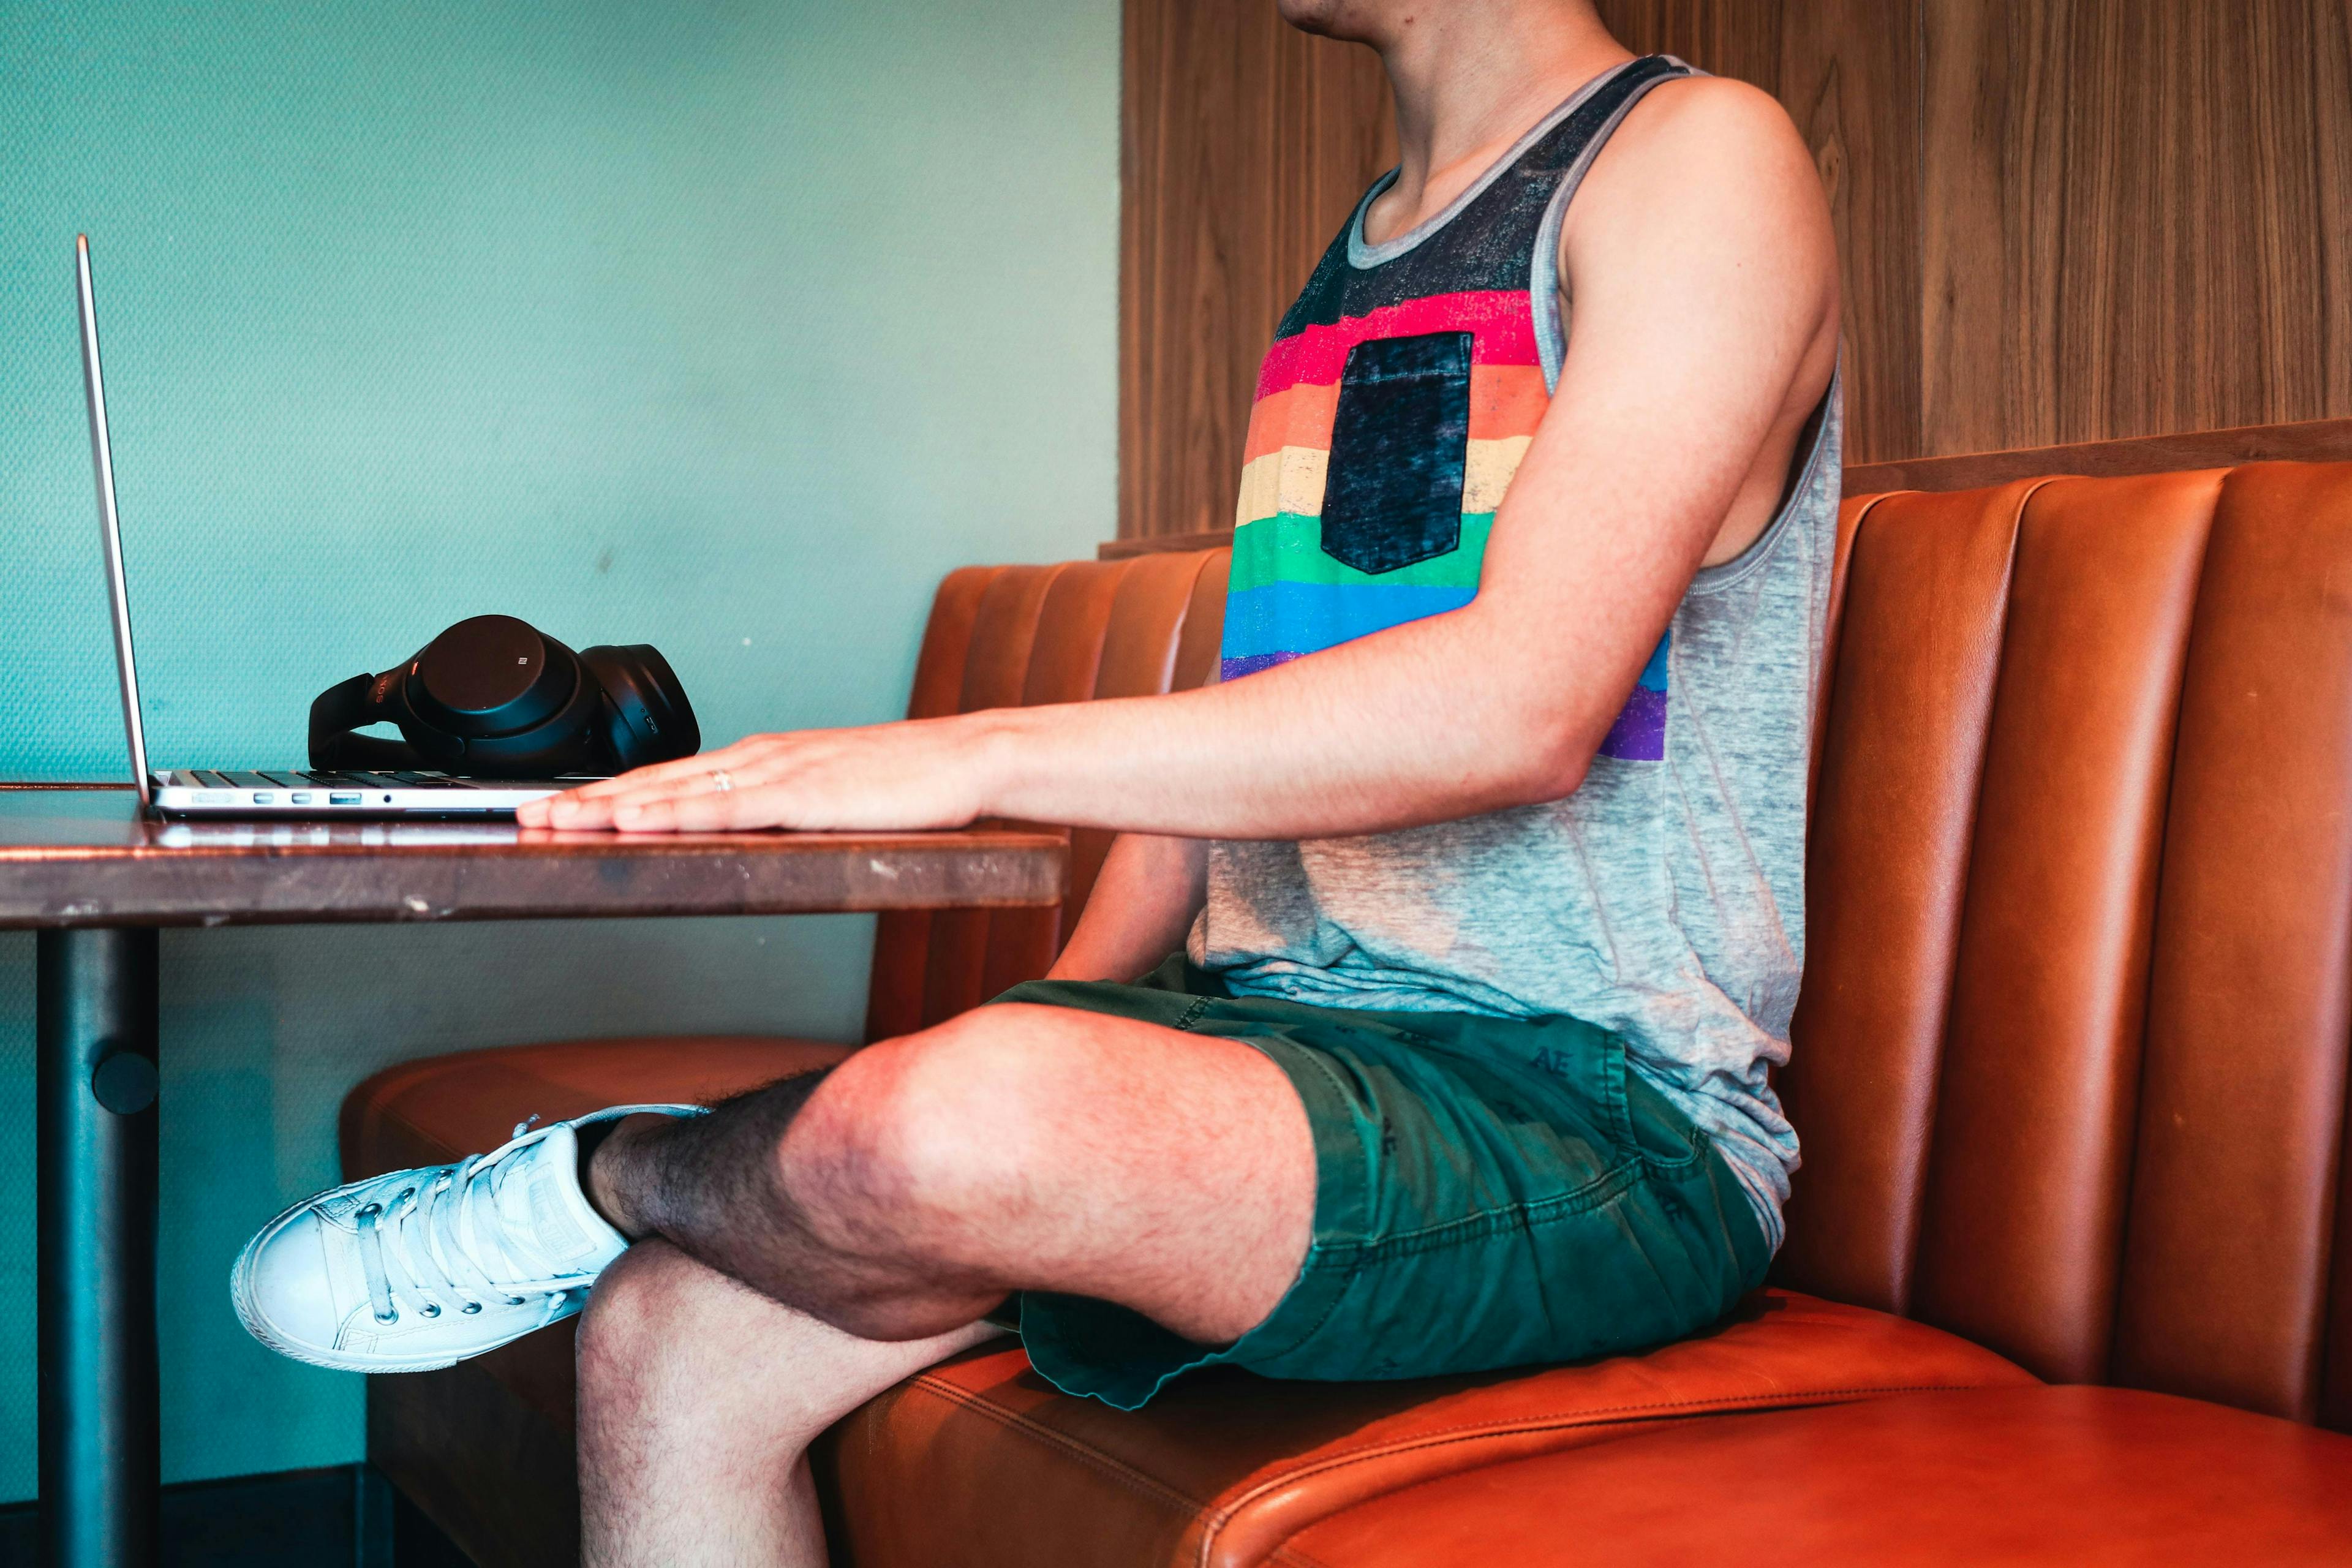 Person wearing a rainbow tank top and green shorts sits at a booth, using a laptop on a wooden table, with black headphones next to the laptop in a cozy indoor setting.